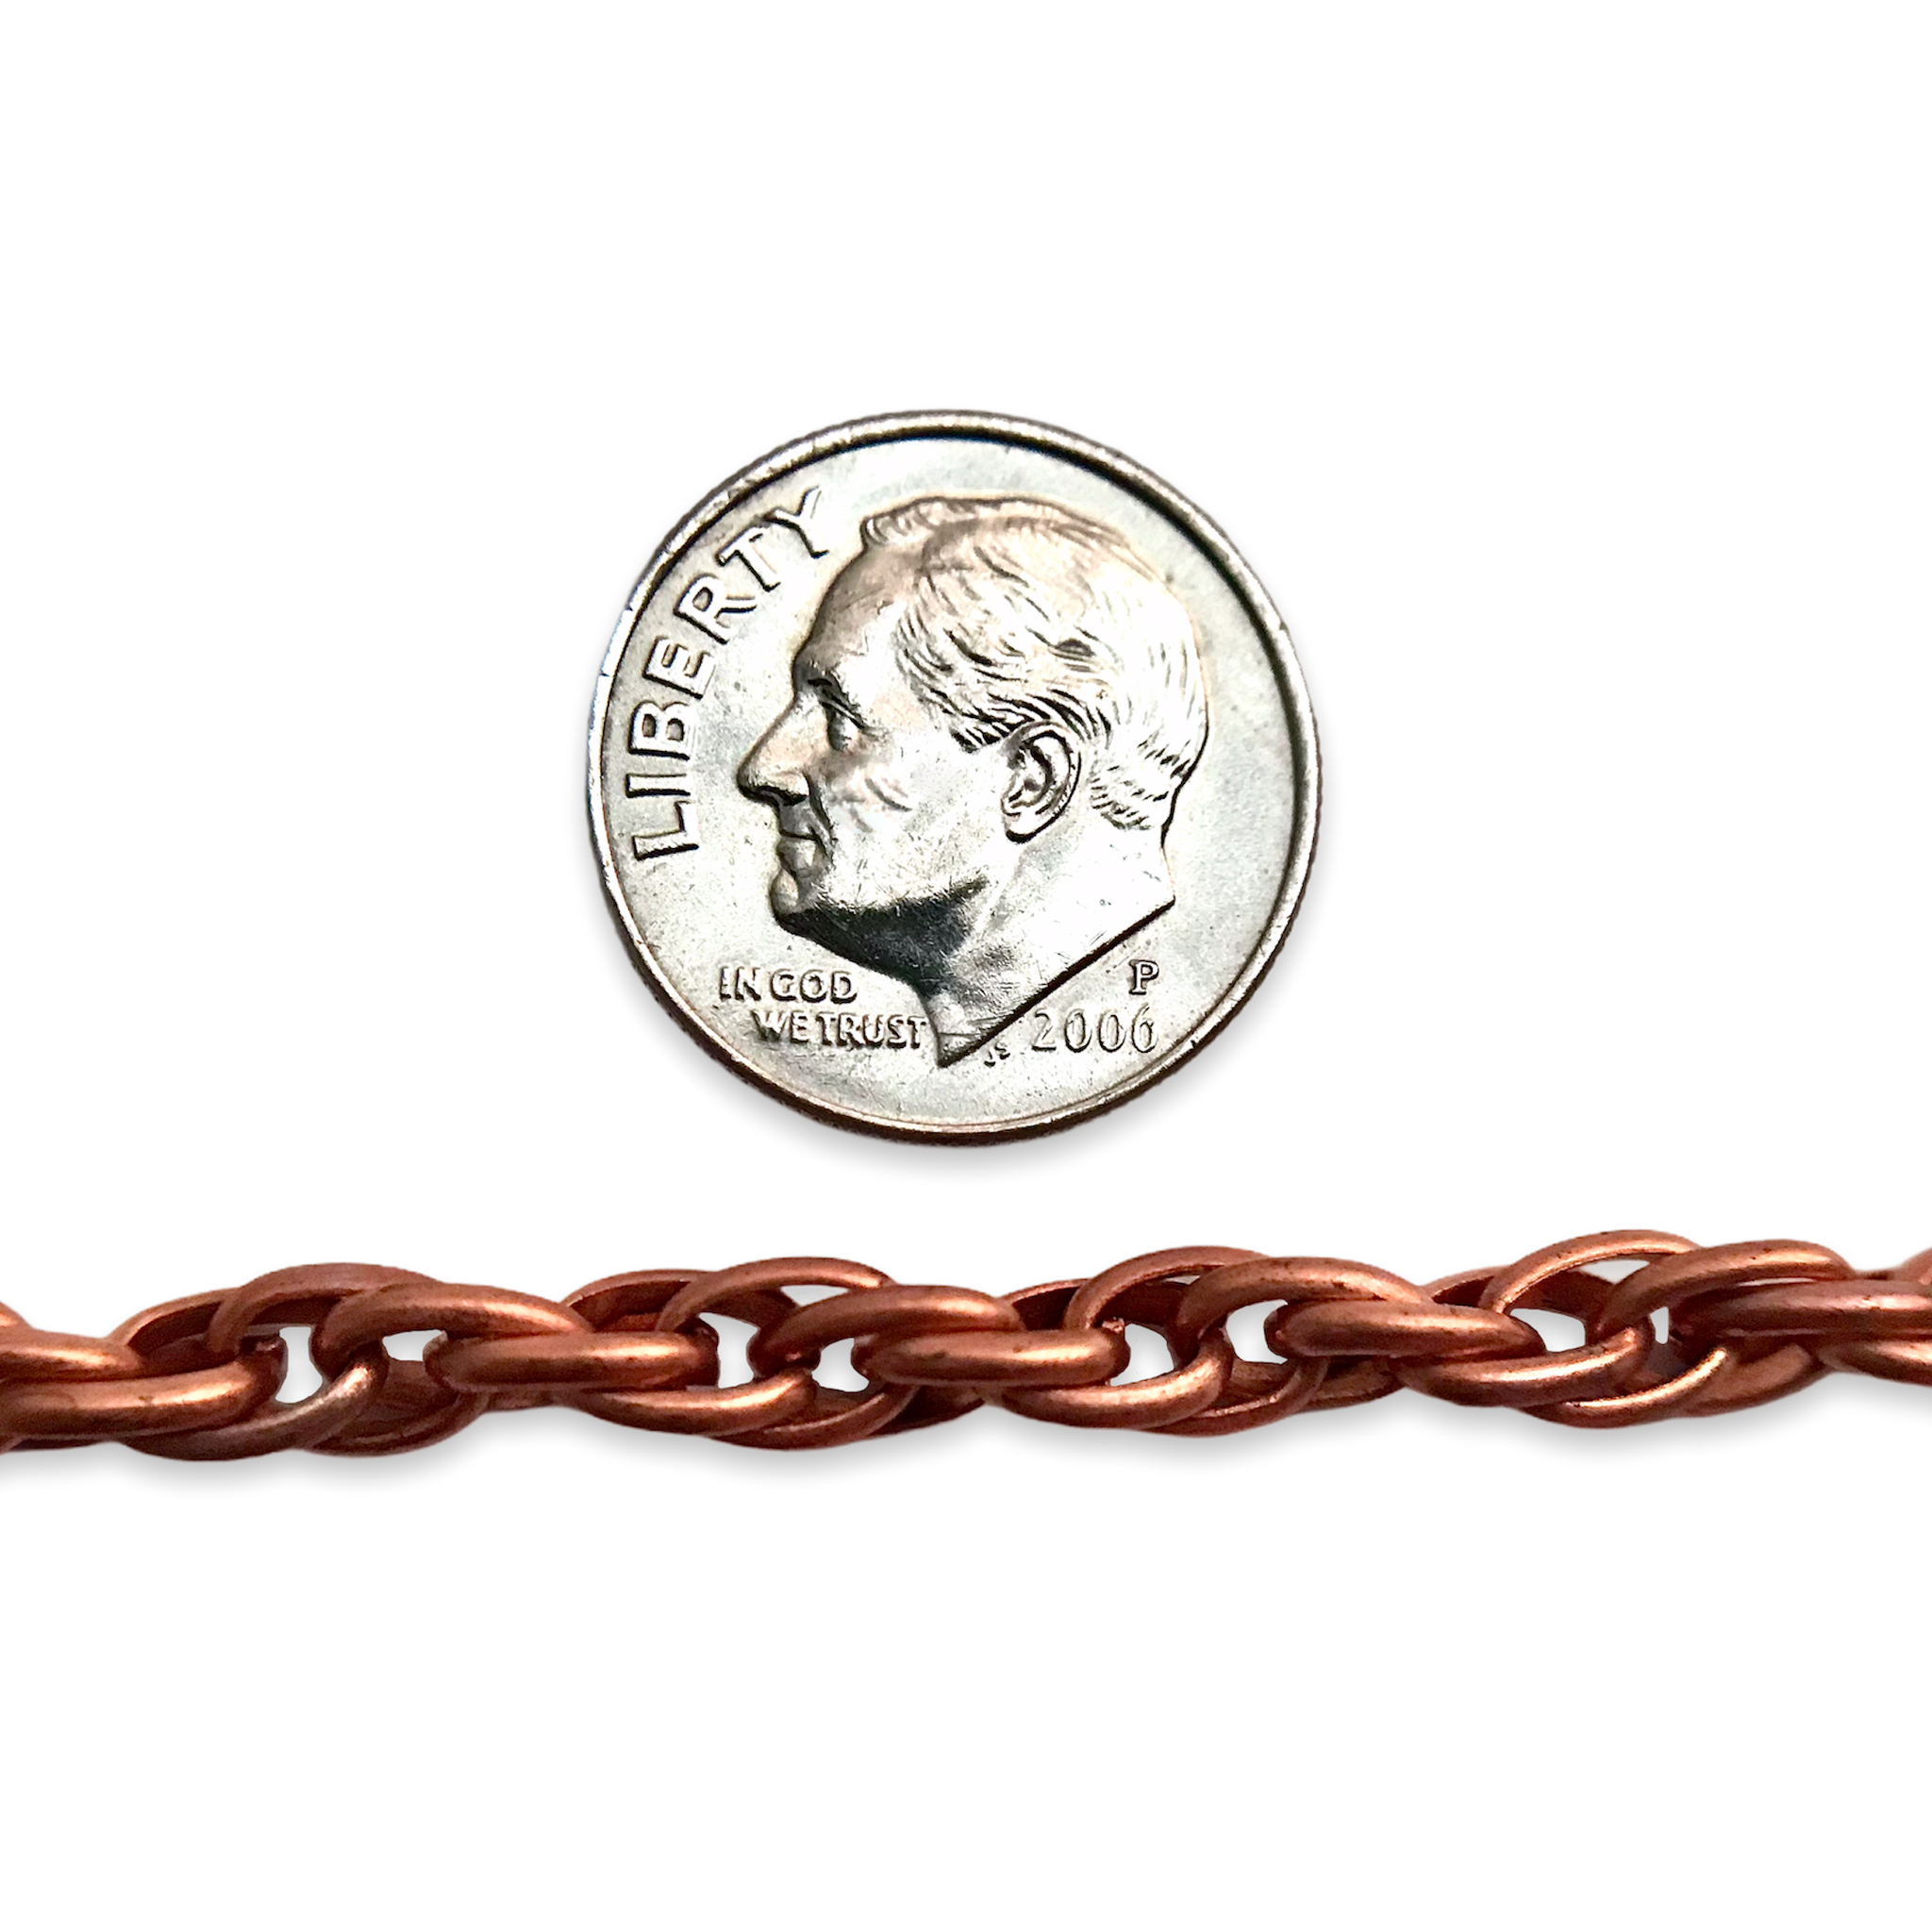 Antique Copper-Plated Oval Link Chain by the Foot